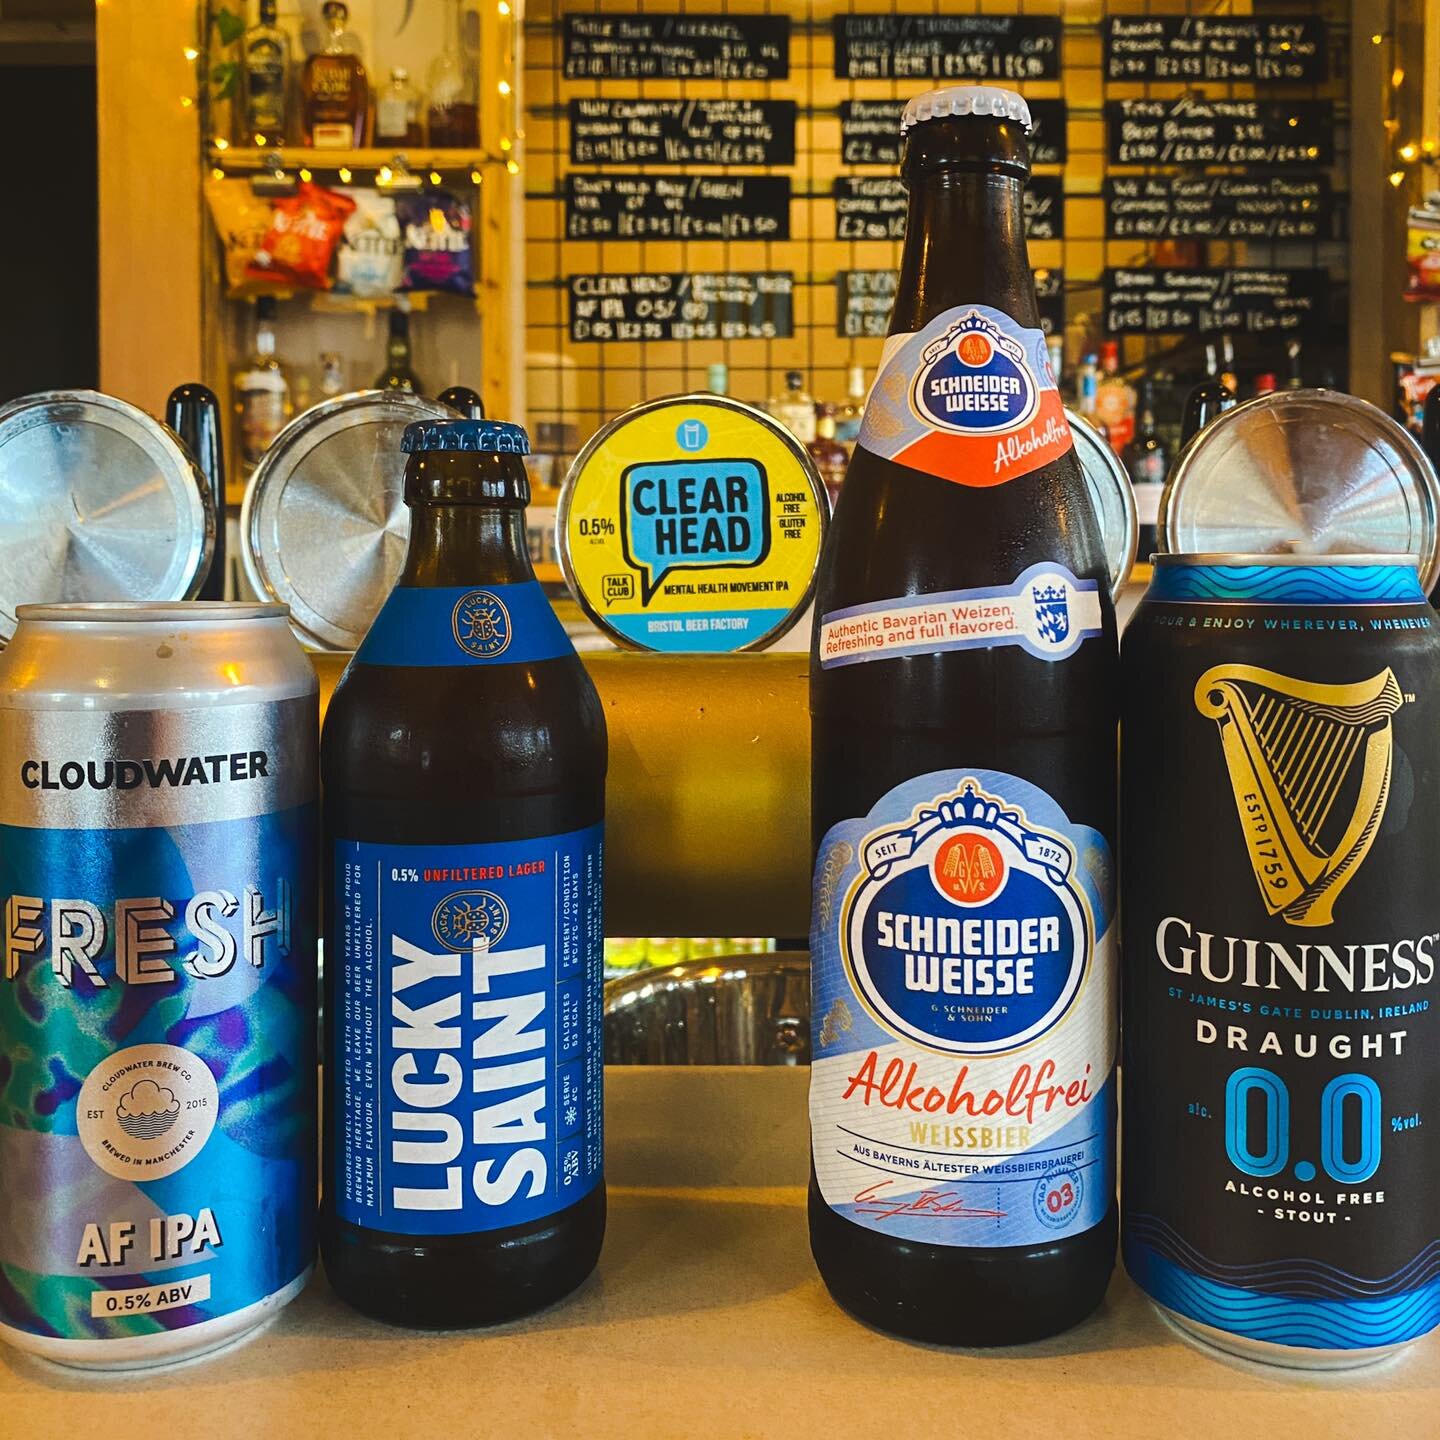 Are you doing Dry January? We&rsquo;ve got you covered with draught Clear Head IPA as well as Guinness &amp; Cloudwater Fresh IPA in cans and bottles of Lucky Saint Lager &amp; Schneider Weisse 

#dryjanuary #craft #beer #craftbeer #hovepubs